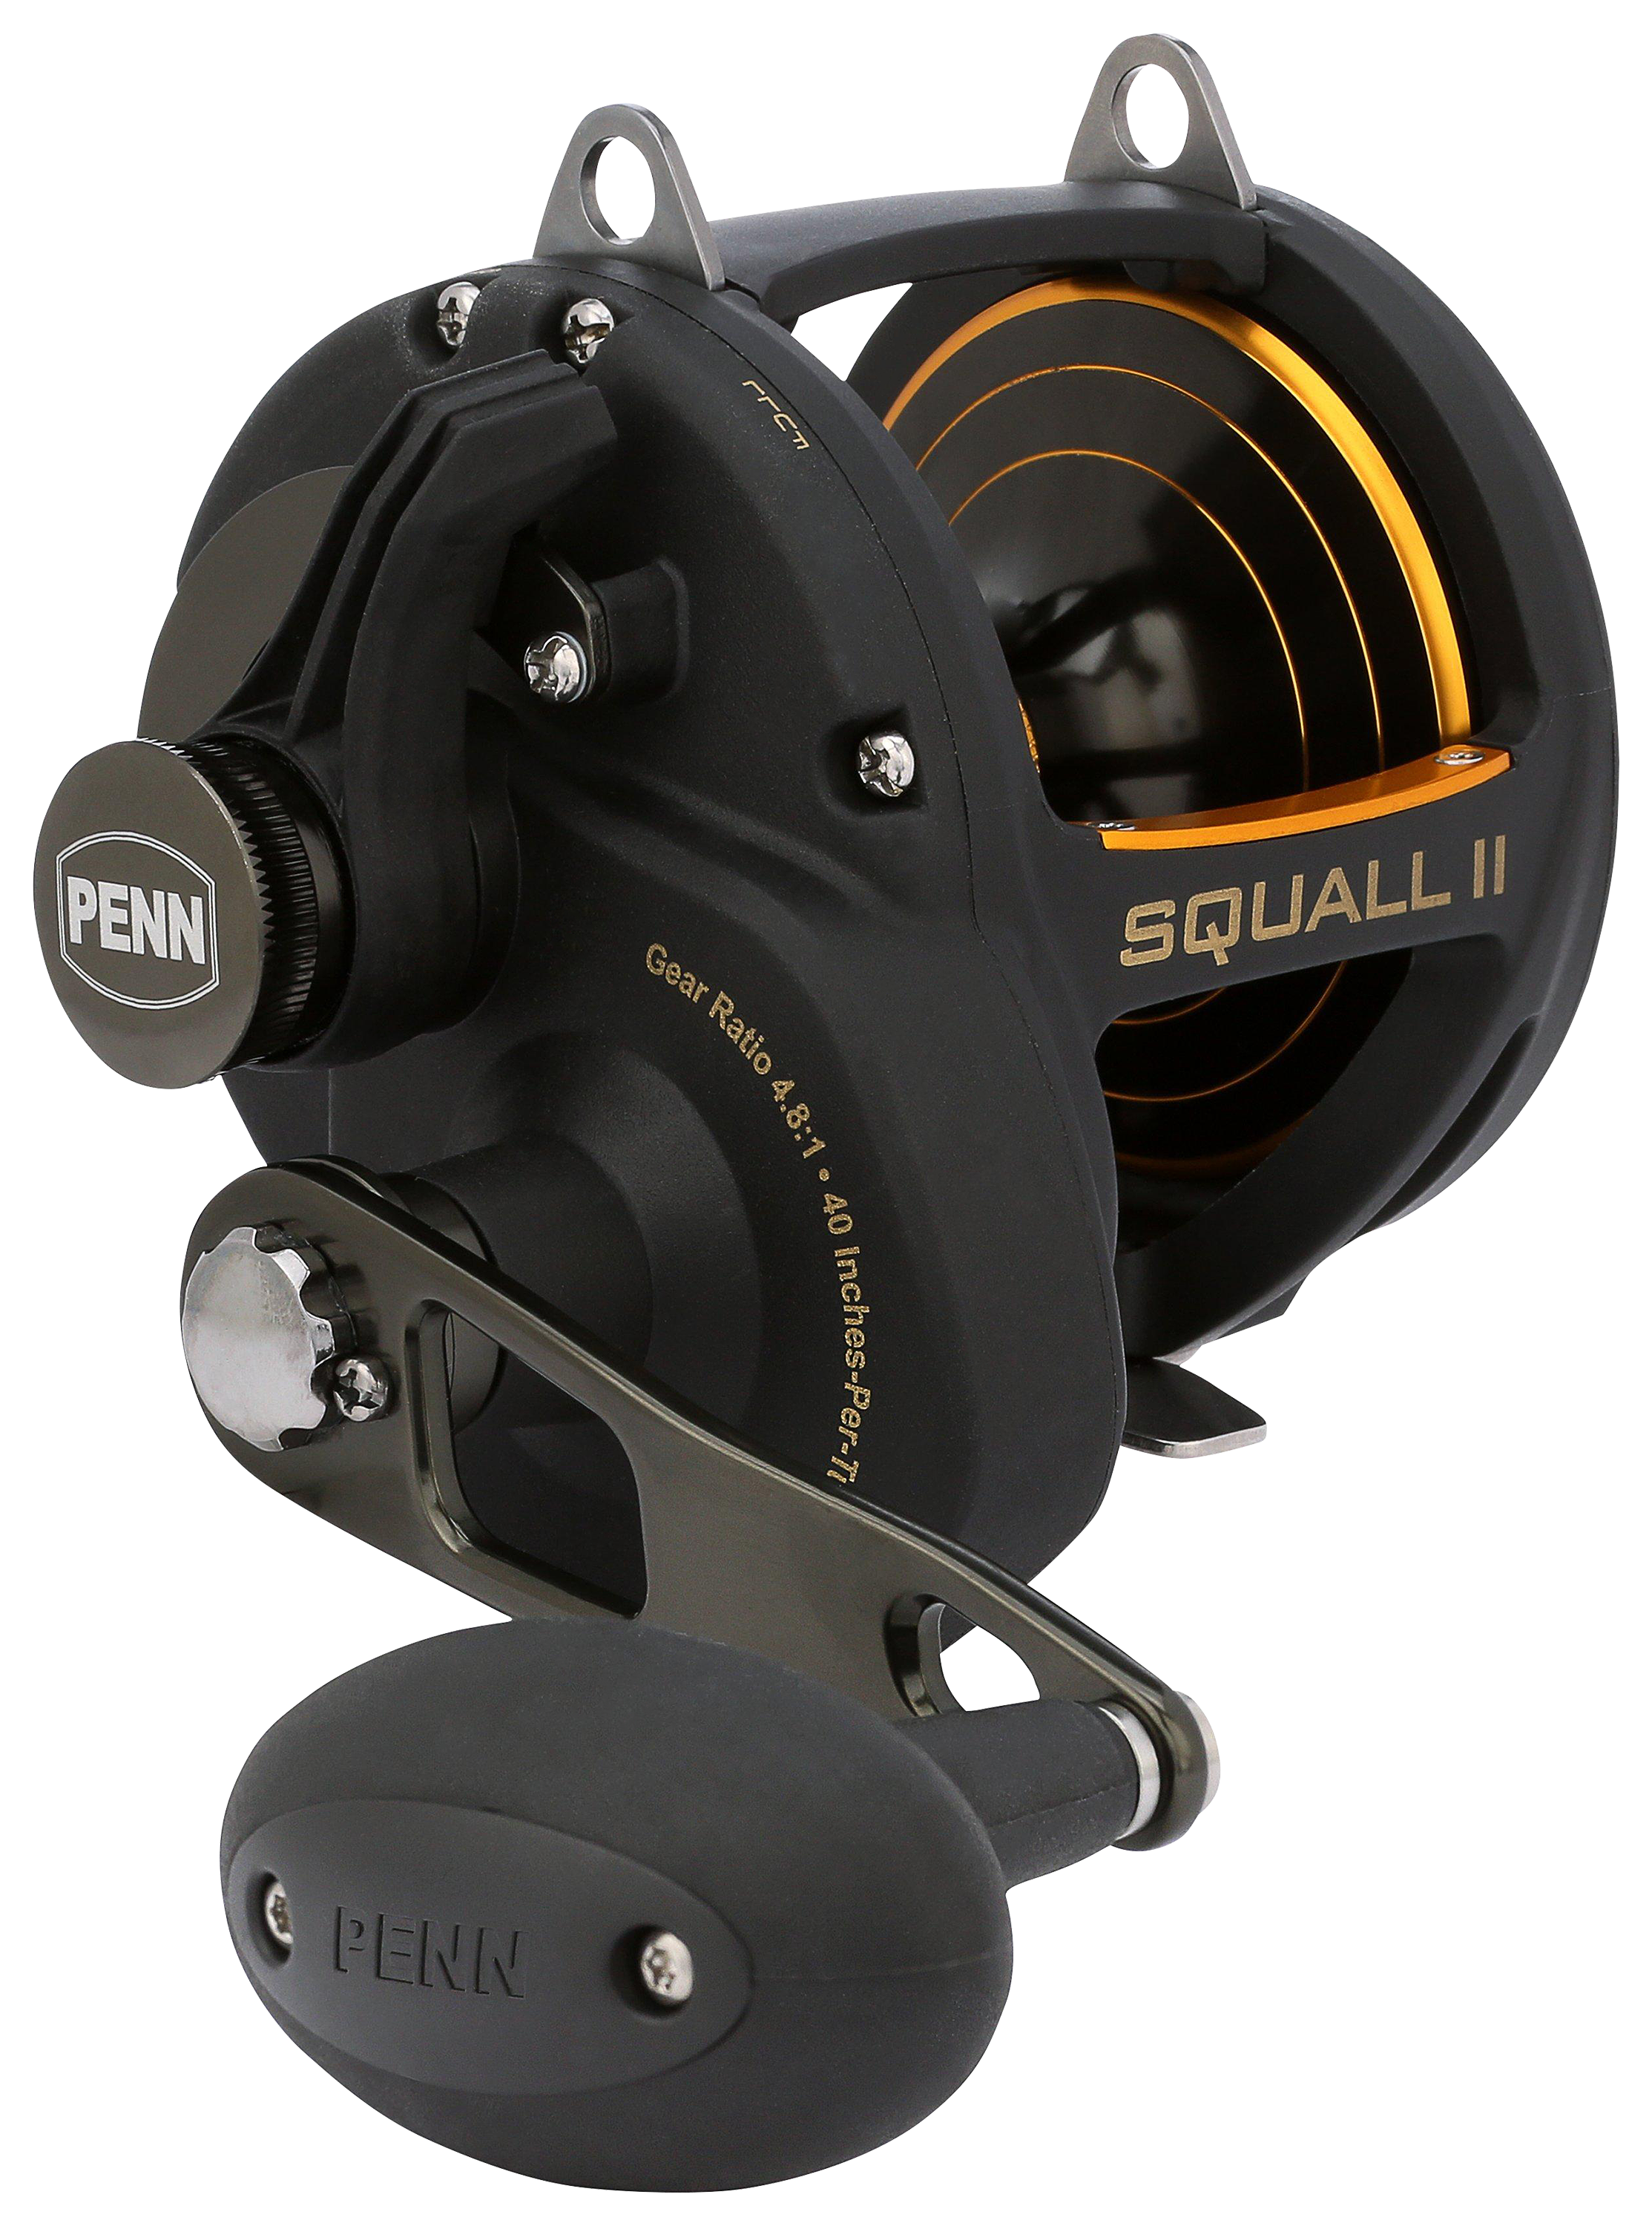 PENN Squall II Lever Drag Conventional Reel - SQLII50LD